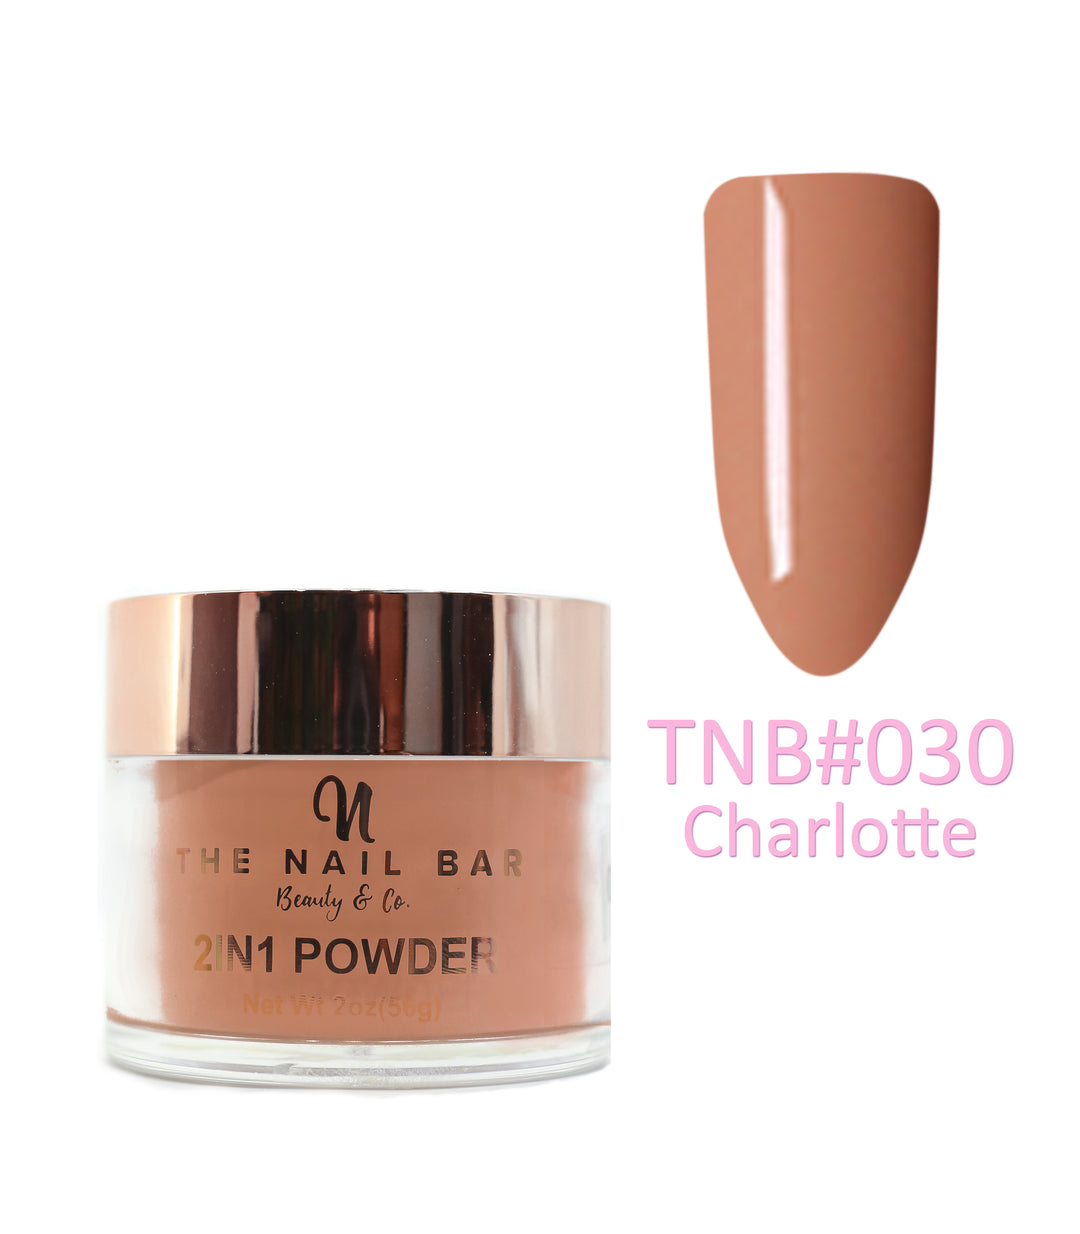 2-In-1 Dipping/Acrylic colour powder (2oz) -Charlotte - The Nail Bar Beauty & Co.